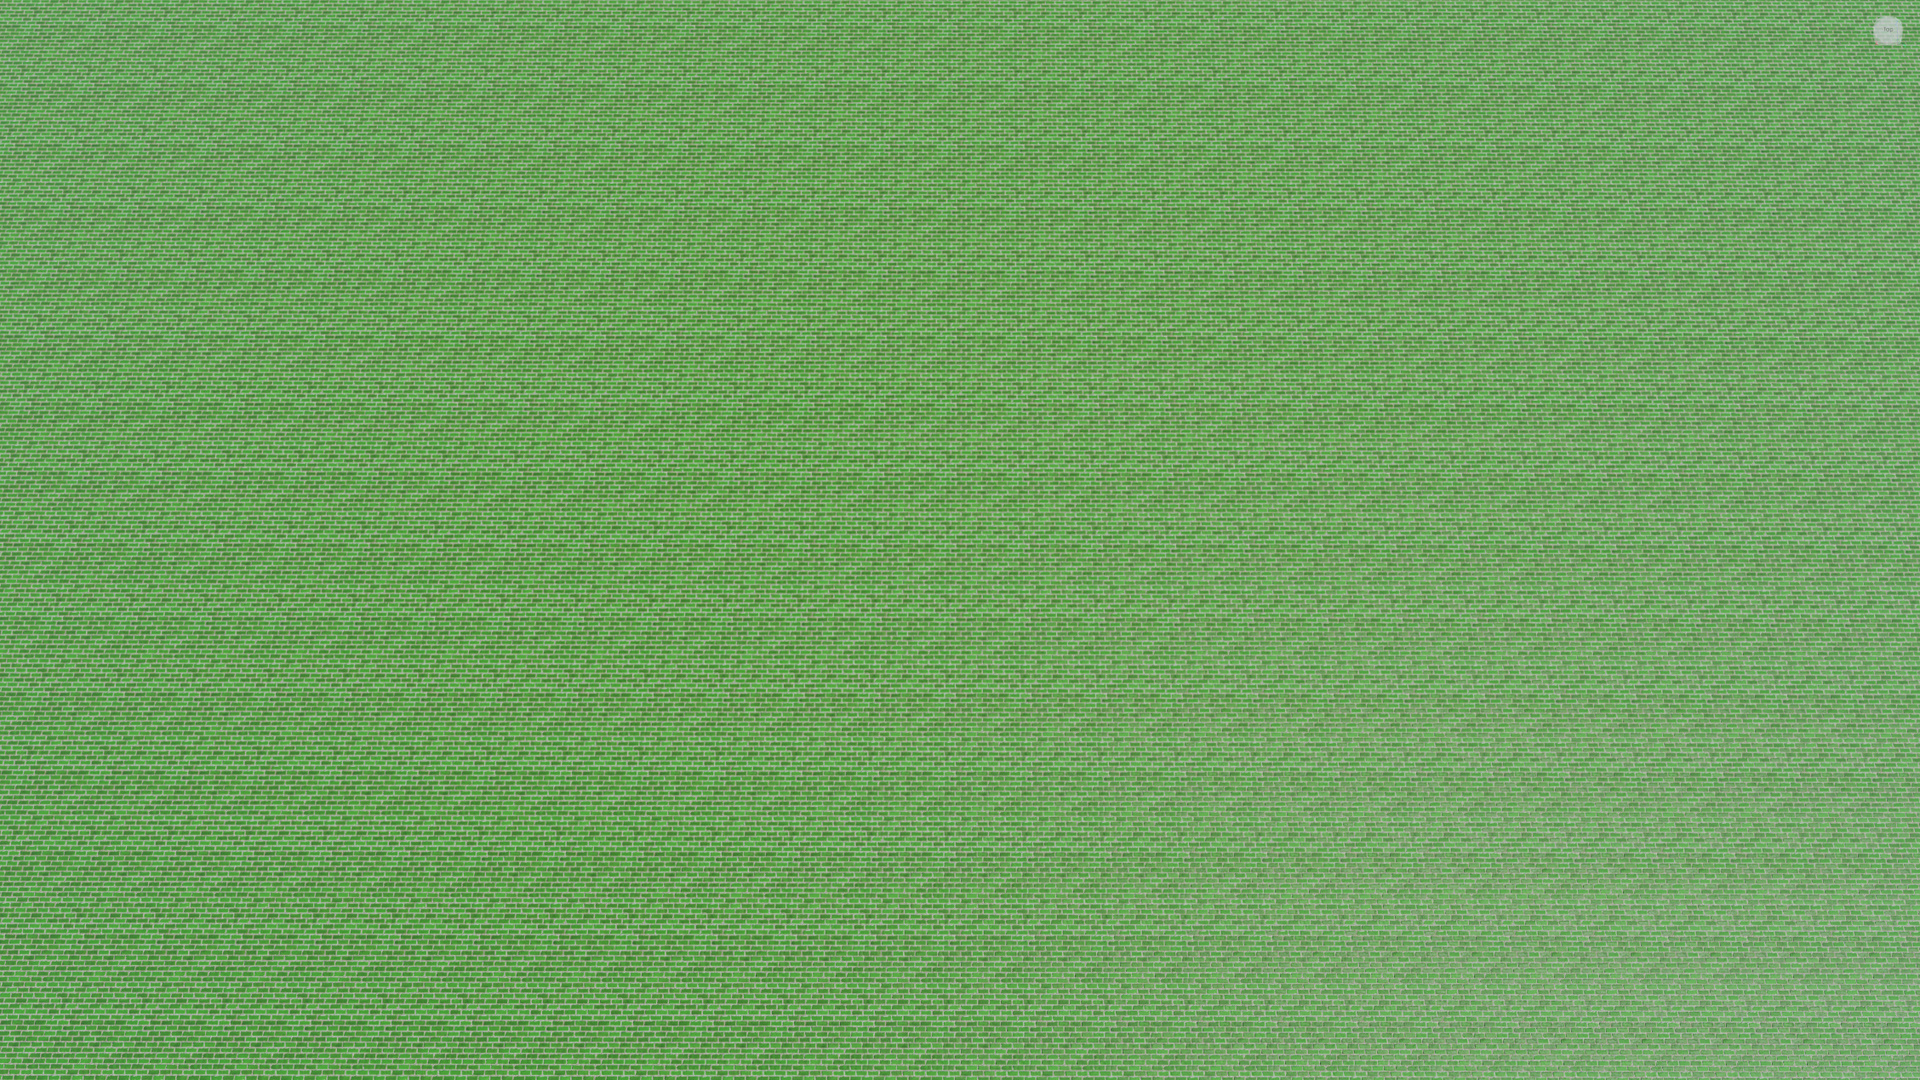 A green brick baseplate viewed from the top down.